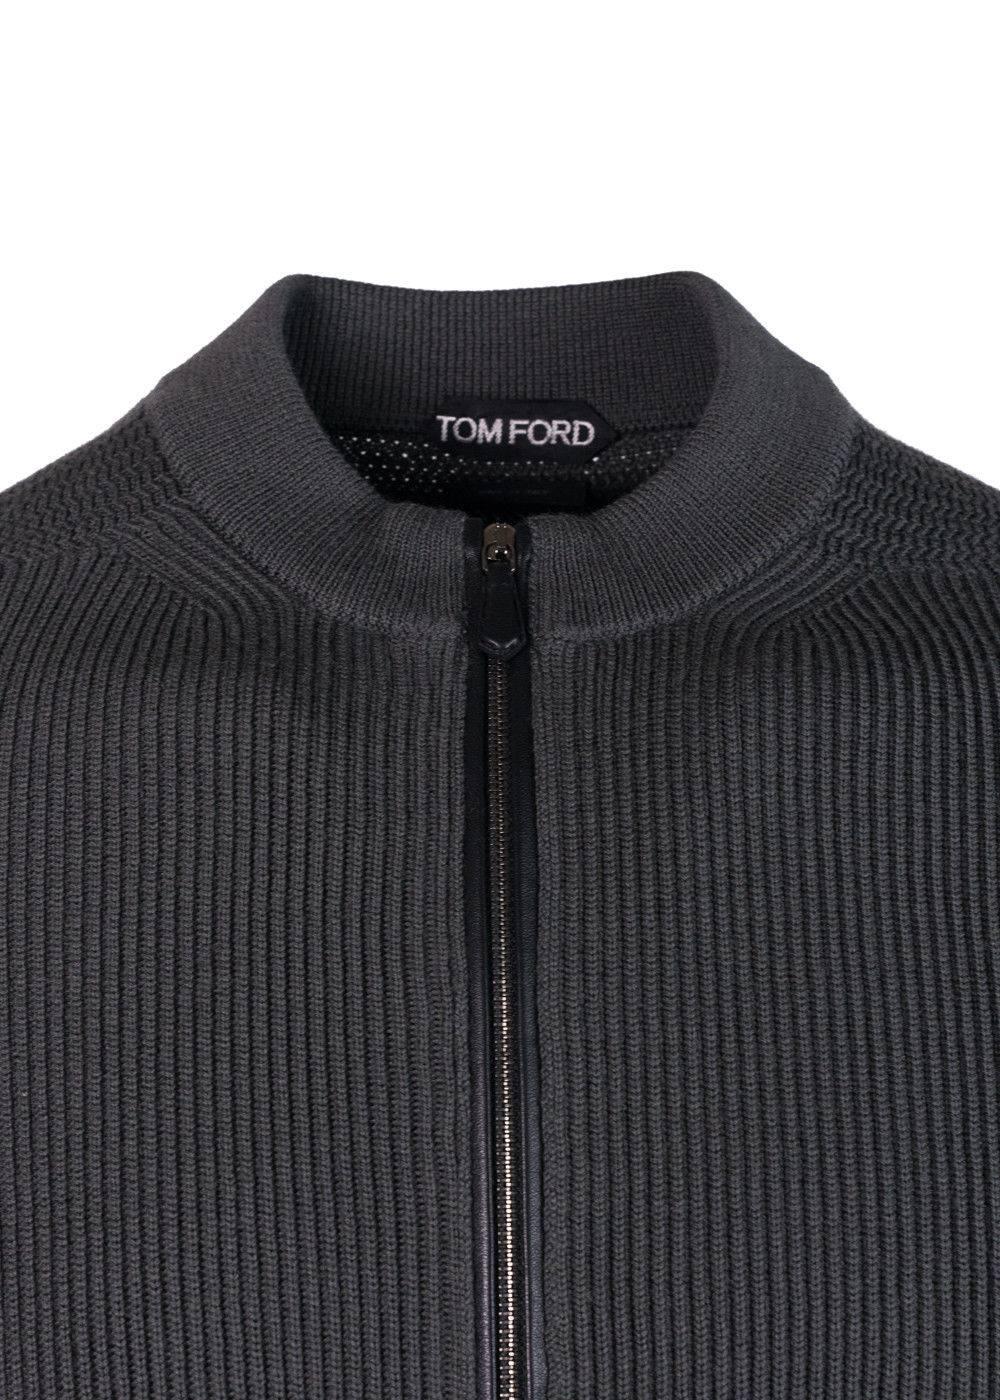 Brand New Tom Ford Wool Sweater
Original with Tags 
Retails in Stores & Online for $1990
Size USA Medium

Tom Ford's Grey Wool Sweater is your ideal season essential. This ribbed knit sweater was tightly constructed using high quality wool ensuring